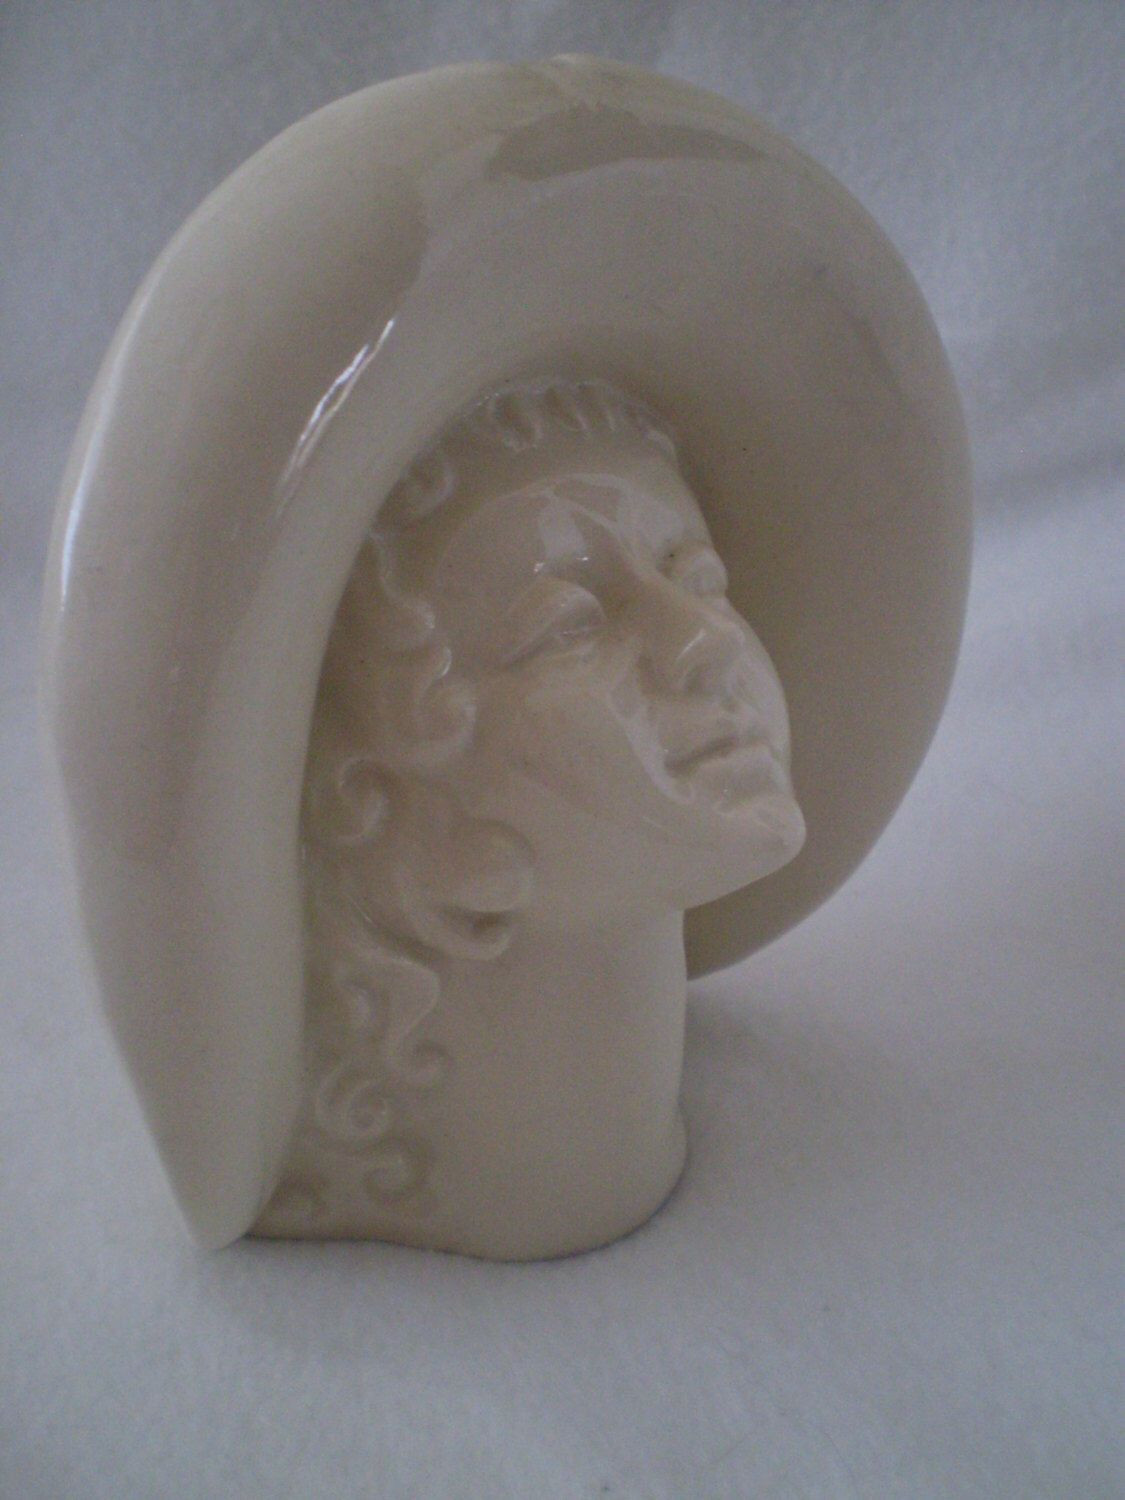 29 Recommended Mannequin Head Vase 2024 free download mannequin head vase of vintage art deco ivory lady head vase by bizzard on etsy https www regarding vintage art deco ivory lady head vase by bizzard on etsy https www